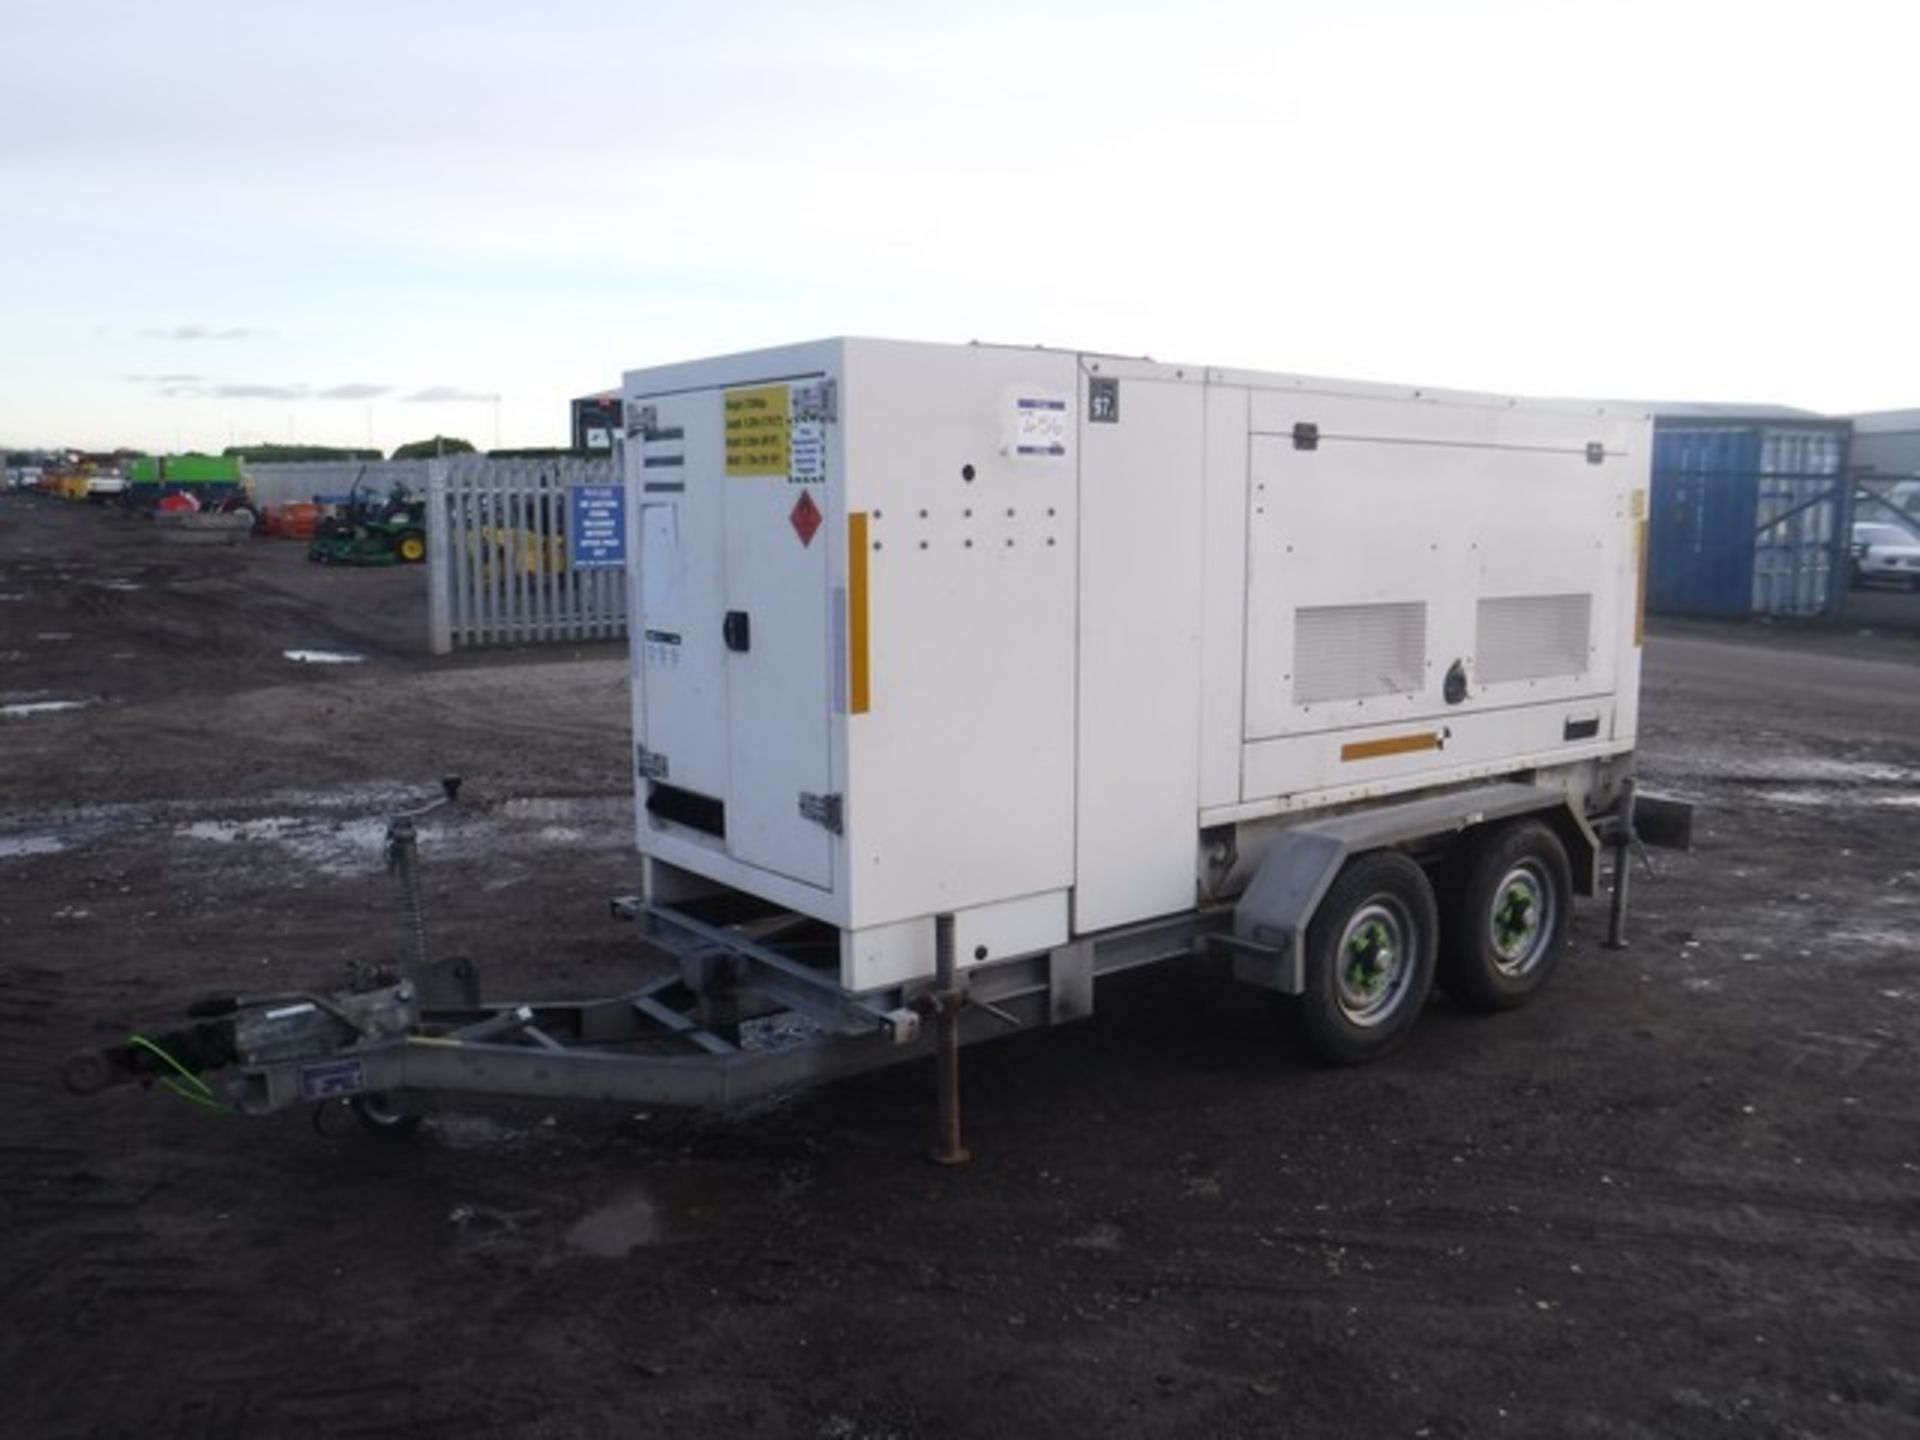 Generator **ENGINE ONLY** on twin axle trailer. Generator and control box have been removed ID no. 1